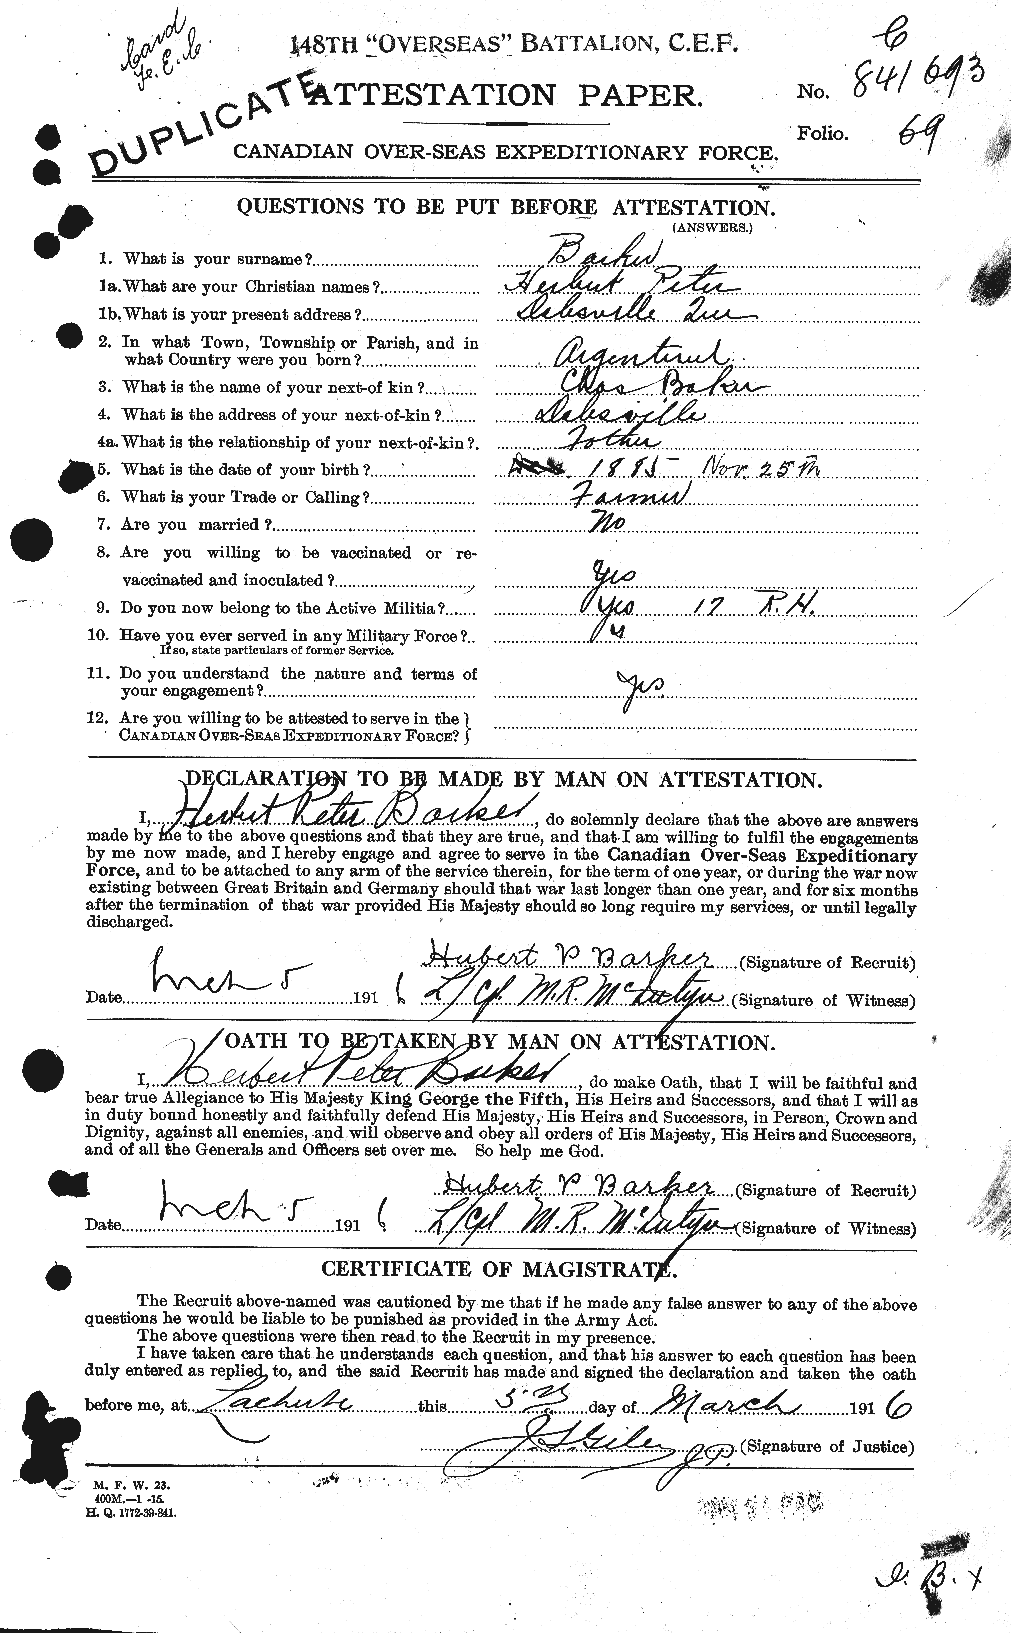 Personnel Records of the First World War - CEF 227495a